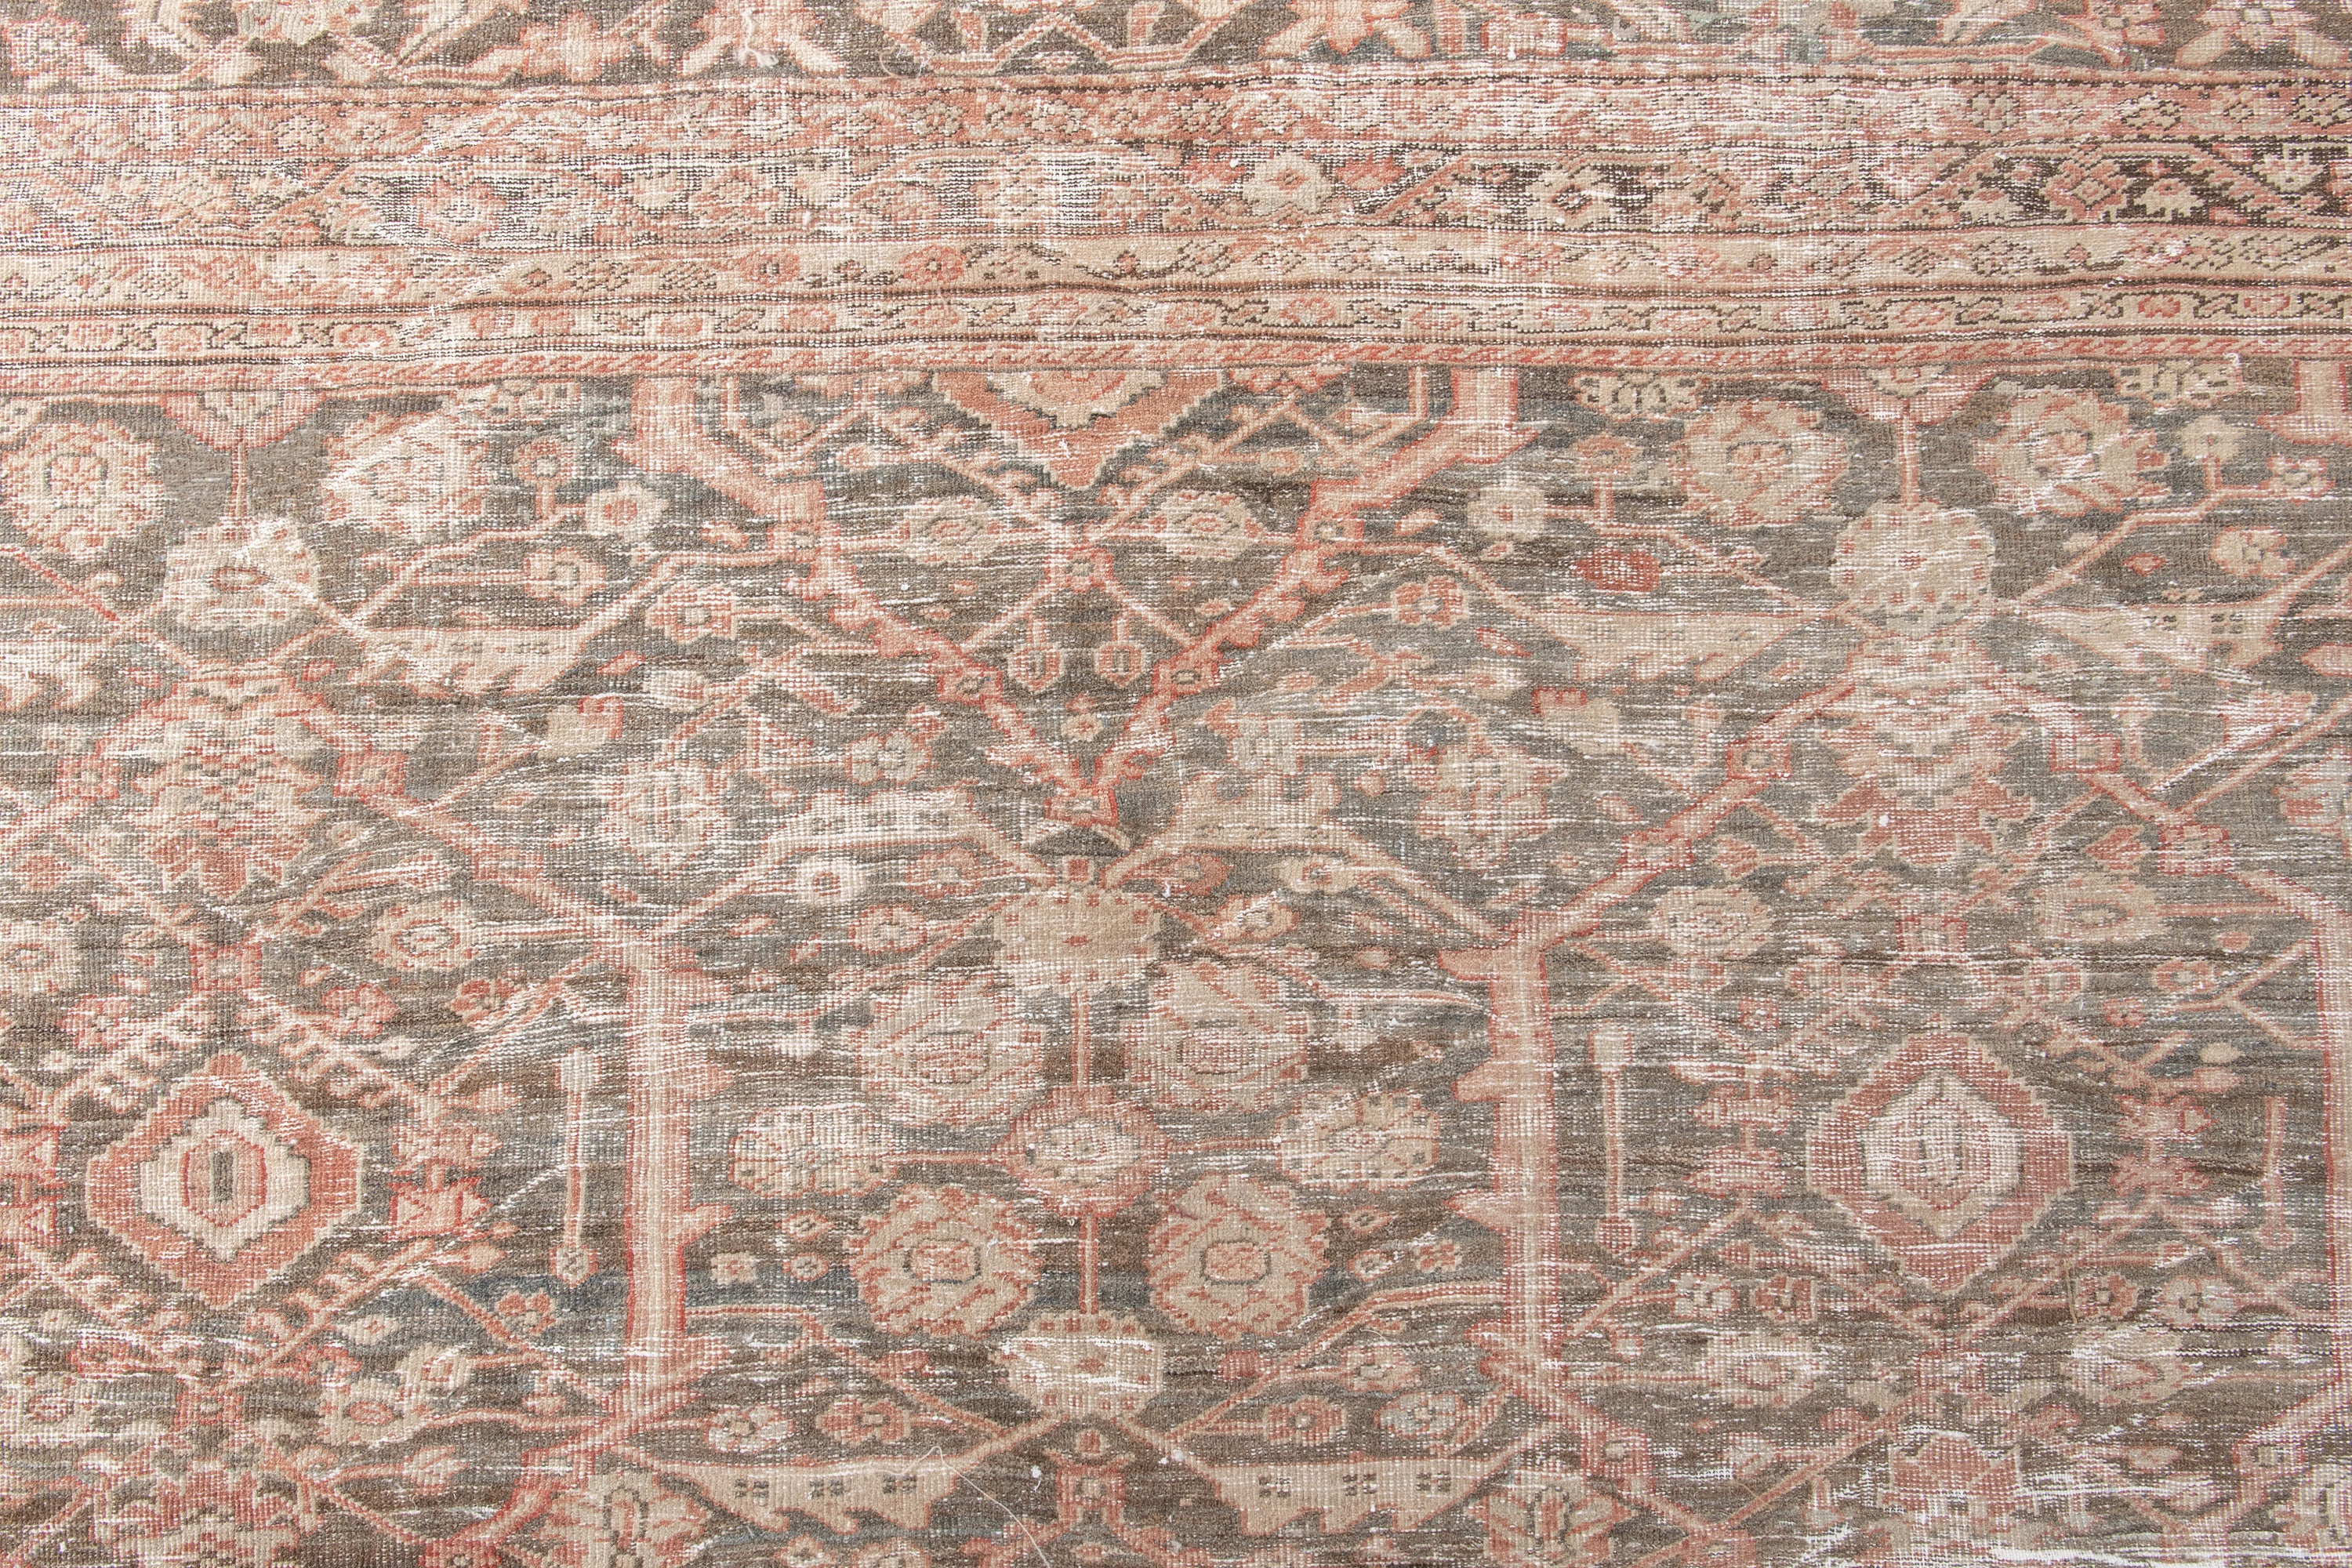 SULTANABAD RUG, AR31037, WEST PERSIA, 14' X 19' - thumbnail 4